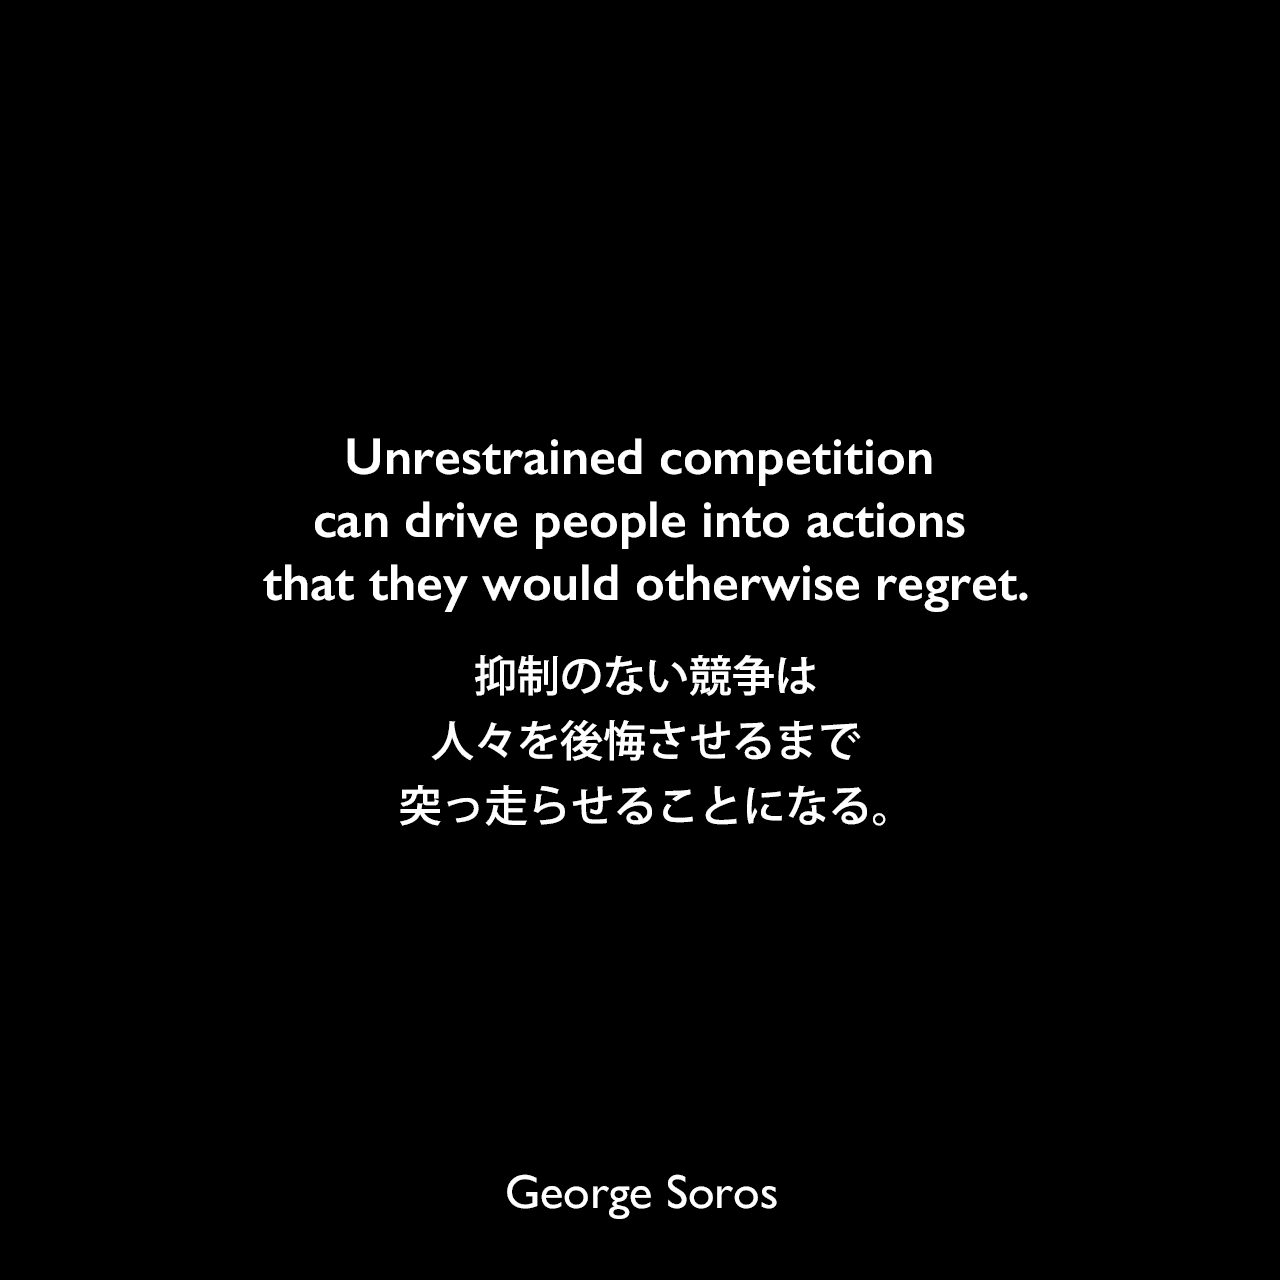 Unrestrained competition can drive people into actions that they would otherwise regret.抑制のない競争は、人々を後悔させるまで突っ走らせることになる。George Soros